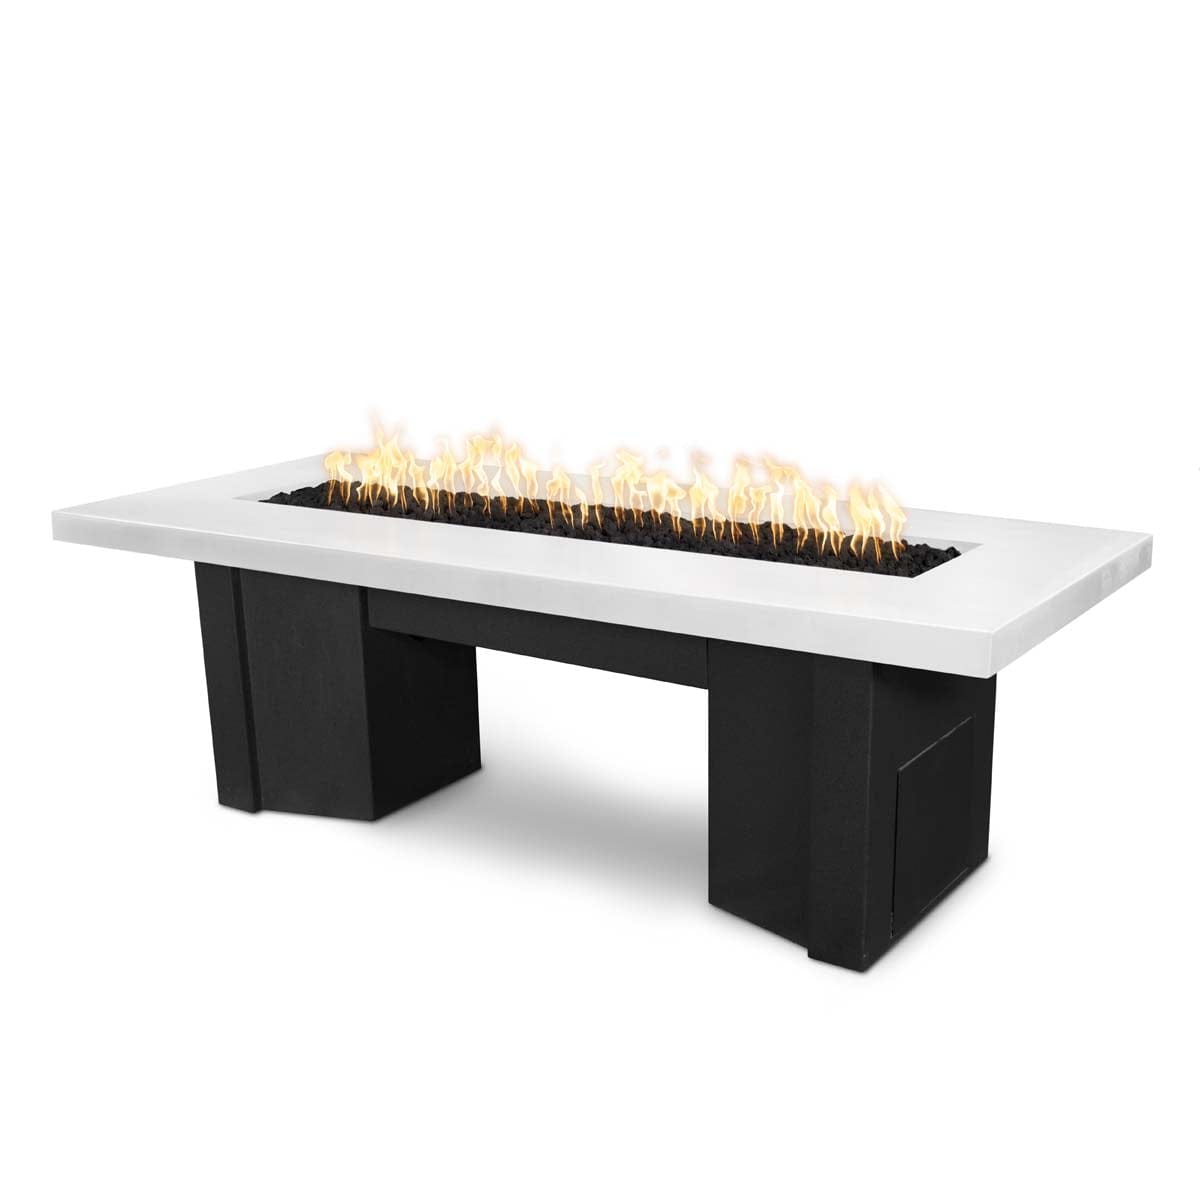 The Outdoor Plus Fire Features Limestone (-LIM) / Black Powder Coated Steel (-BLK) The Outdoor Plus 60&quot; Alameda Fire Table Smooth Concrete in Liquid Propane - Match Lit with Flame Sense System / OPT-ALMGFRC60FSML-LP